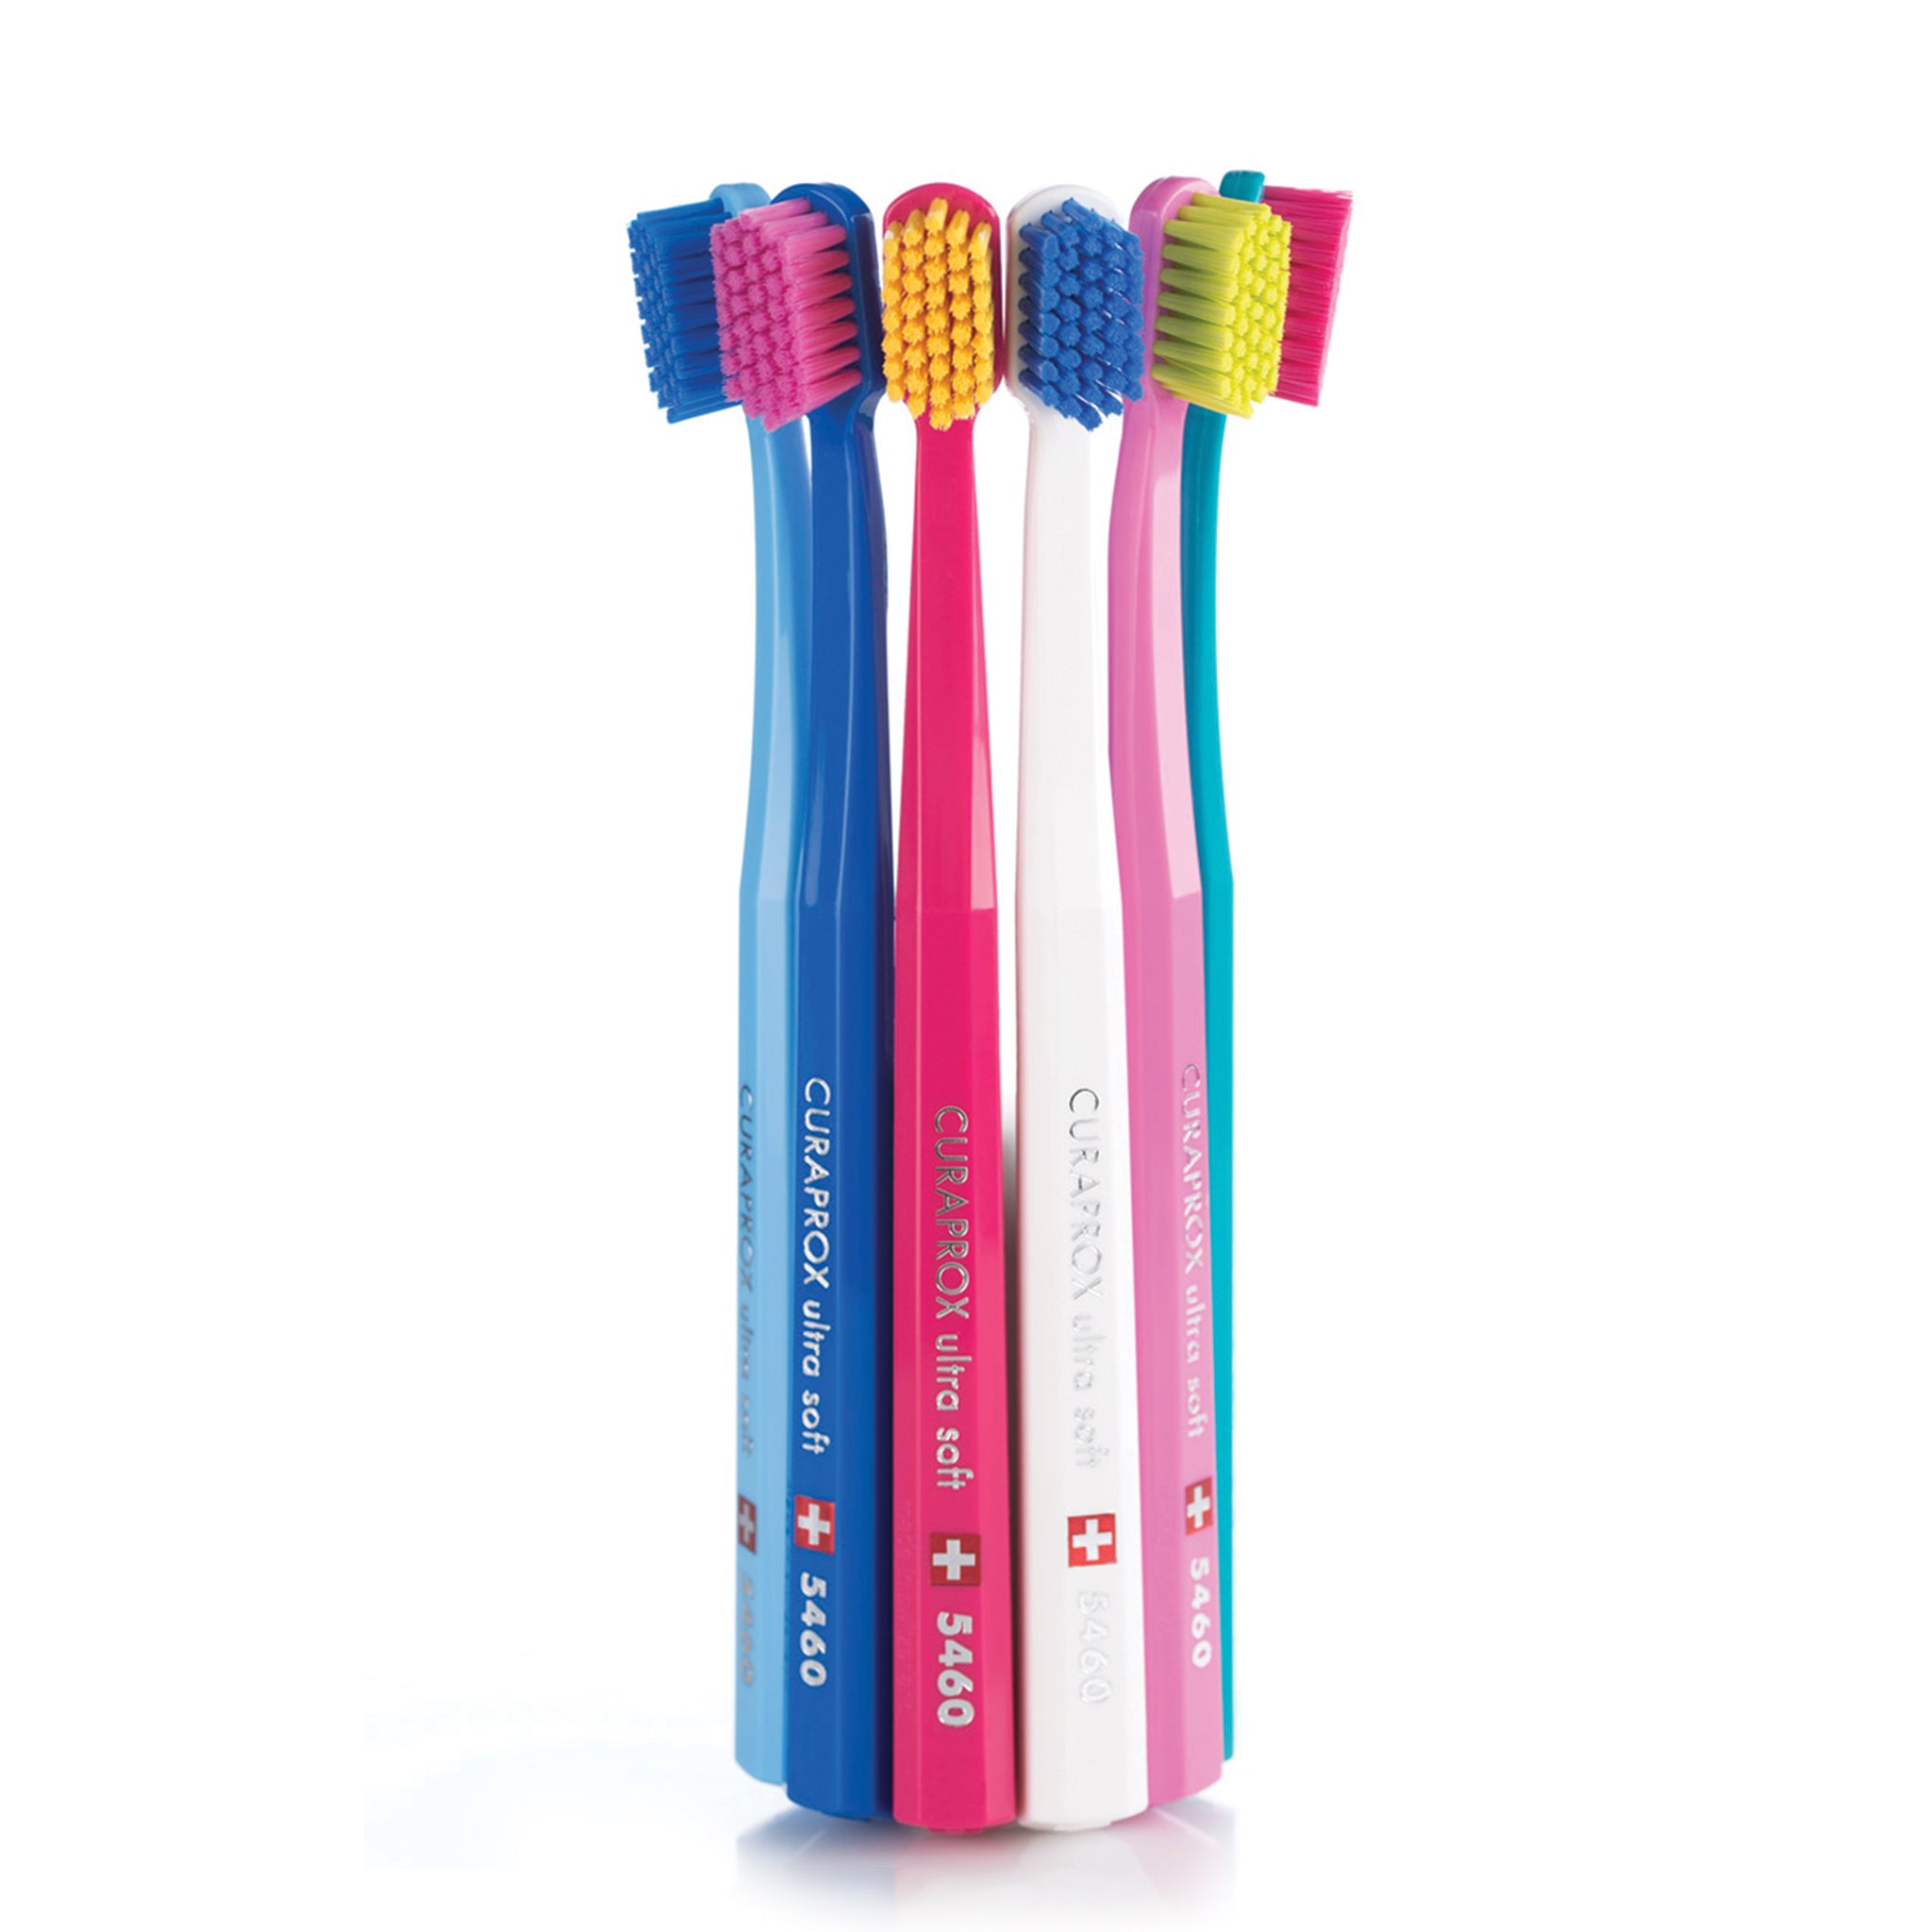 CURAPROX toothbrush's do not use nylon to make the bristles, instead they use very fine filaments made of CUREN®. CUREN® allows the bristles to be very fine ensuring there is no damage to the gums as well as feeling incredibly good when brushing.